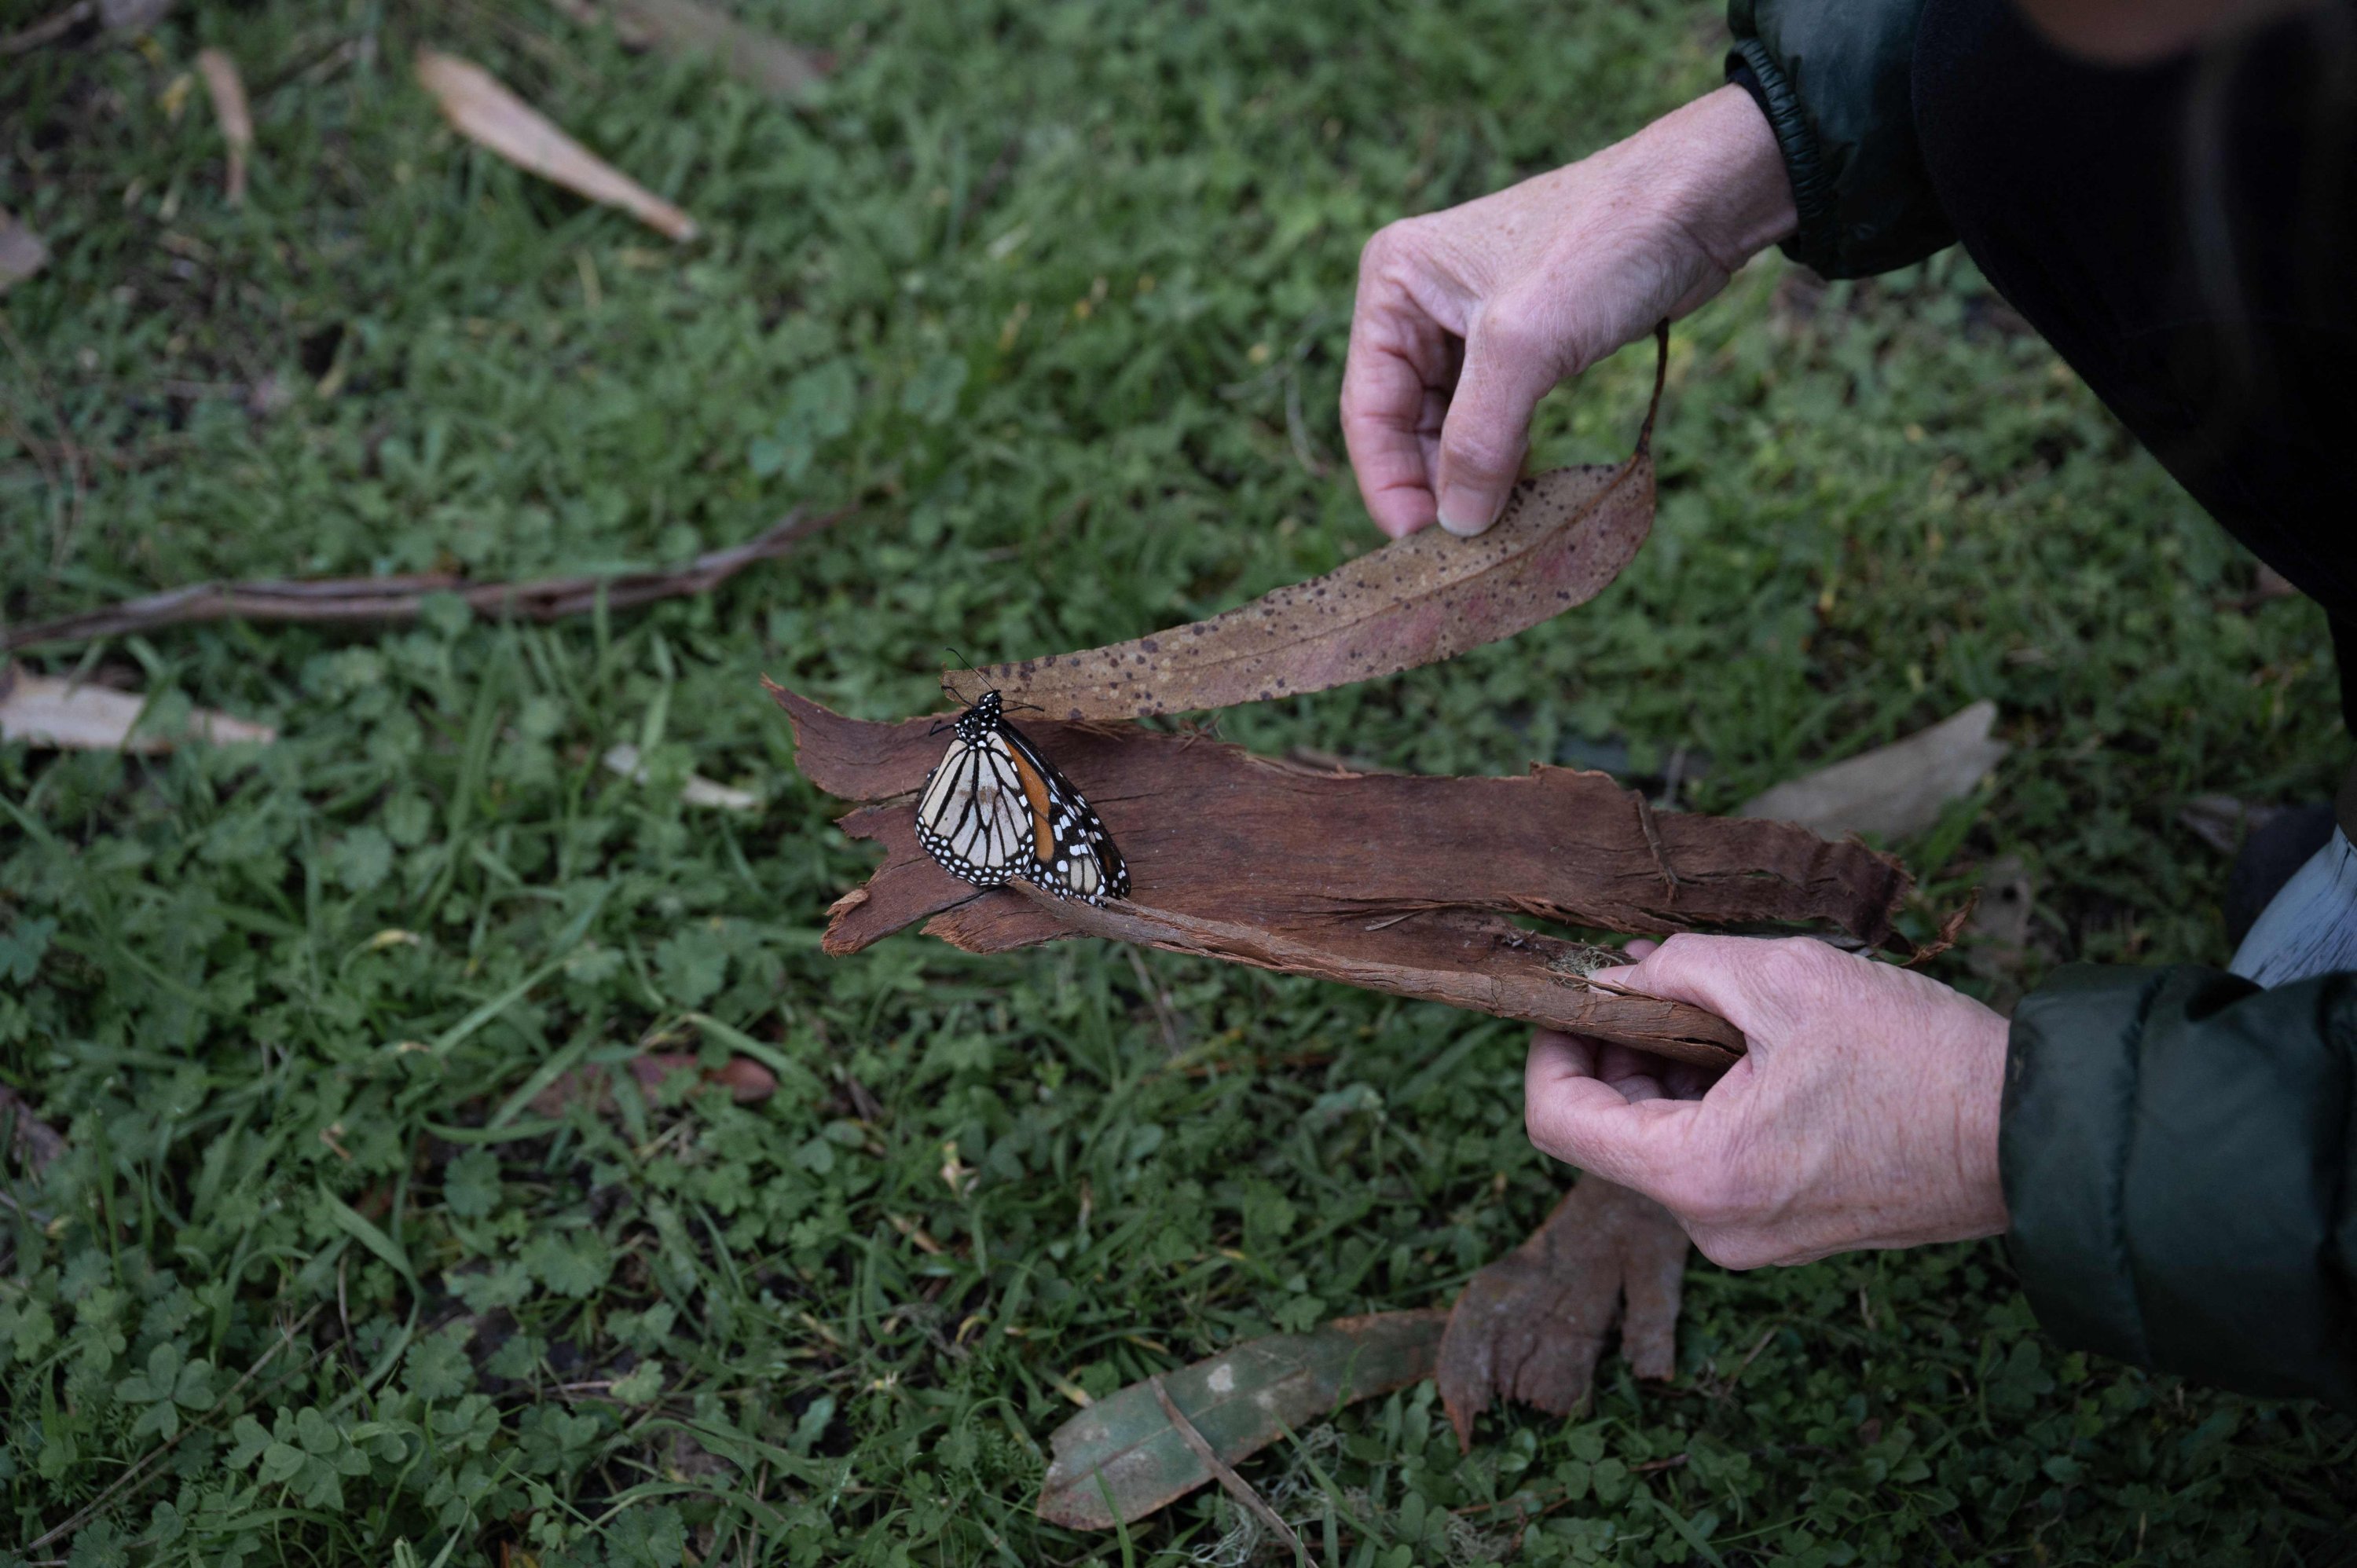 Stephanie Turcotte Edenholm, educator and naturalist, uses leaves and bark to pick up an injured Monarch at the Pacific Grove Monarch Sanctuary in Pacific Grove, California, U.S., Jan. 26, 2023. (AFP Photo)